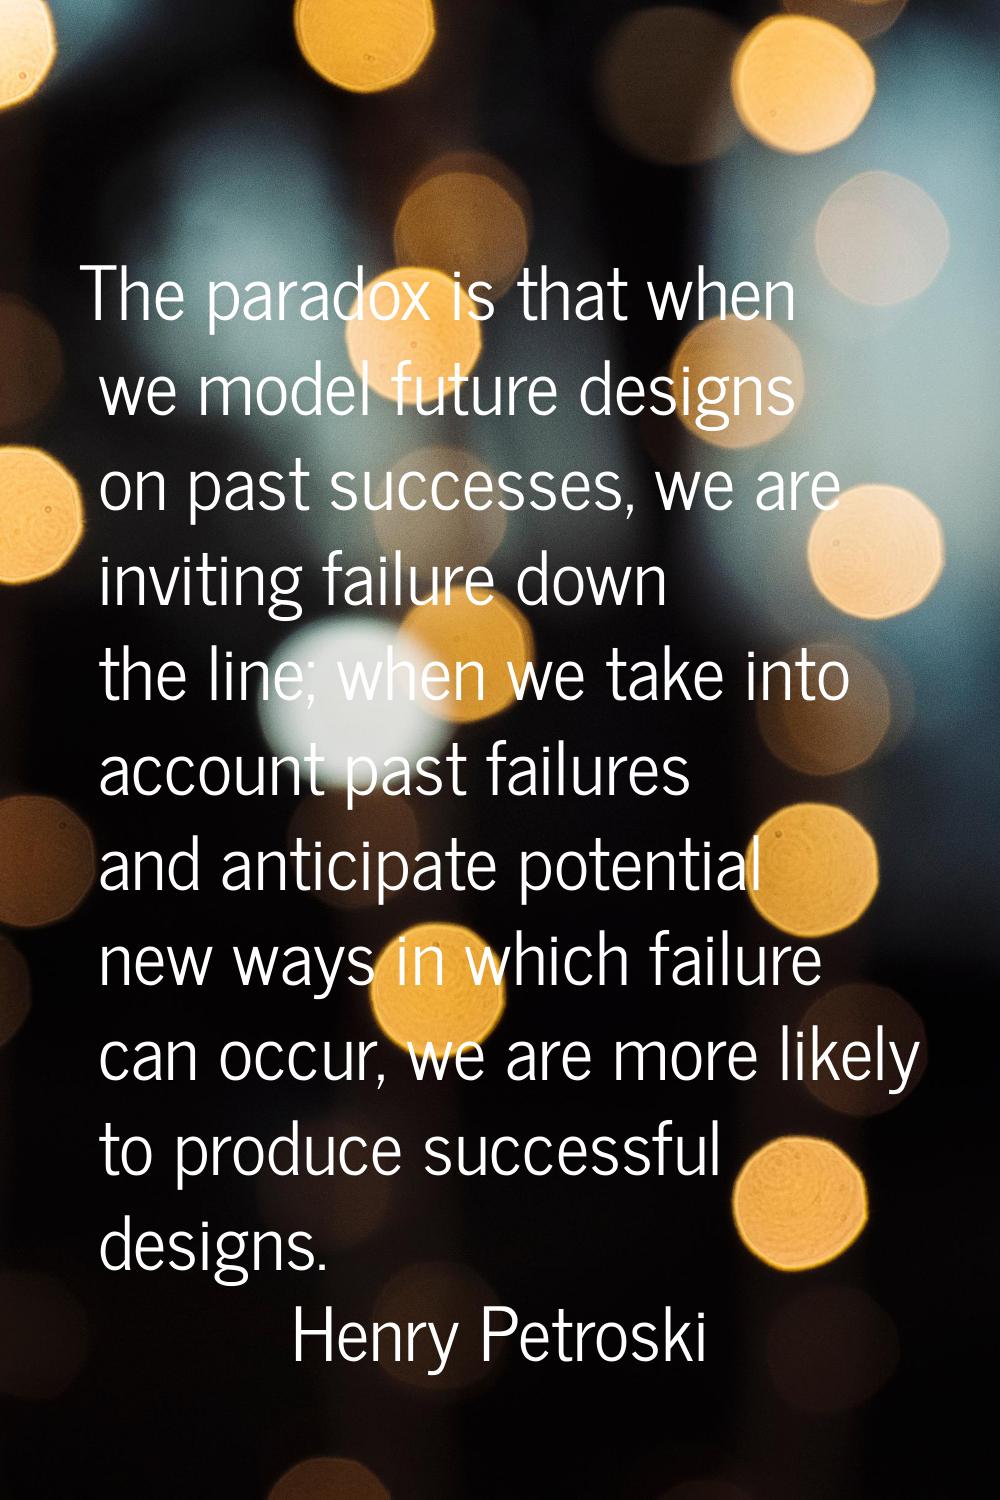 The paradox is that when we model future designs on past successes, we are inviting failure down th